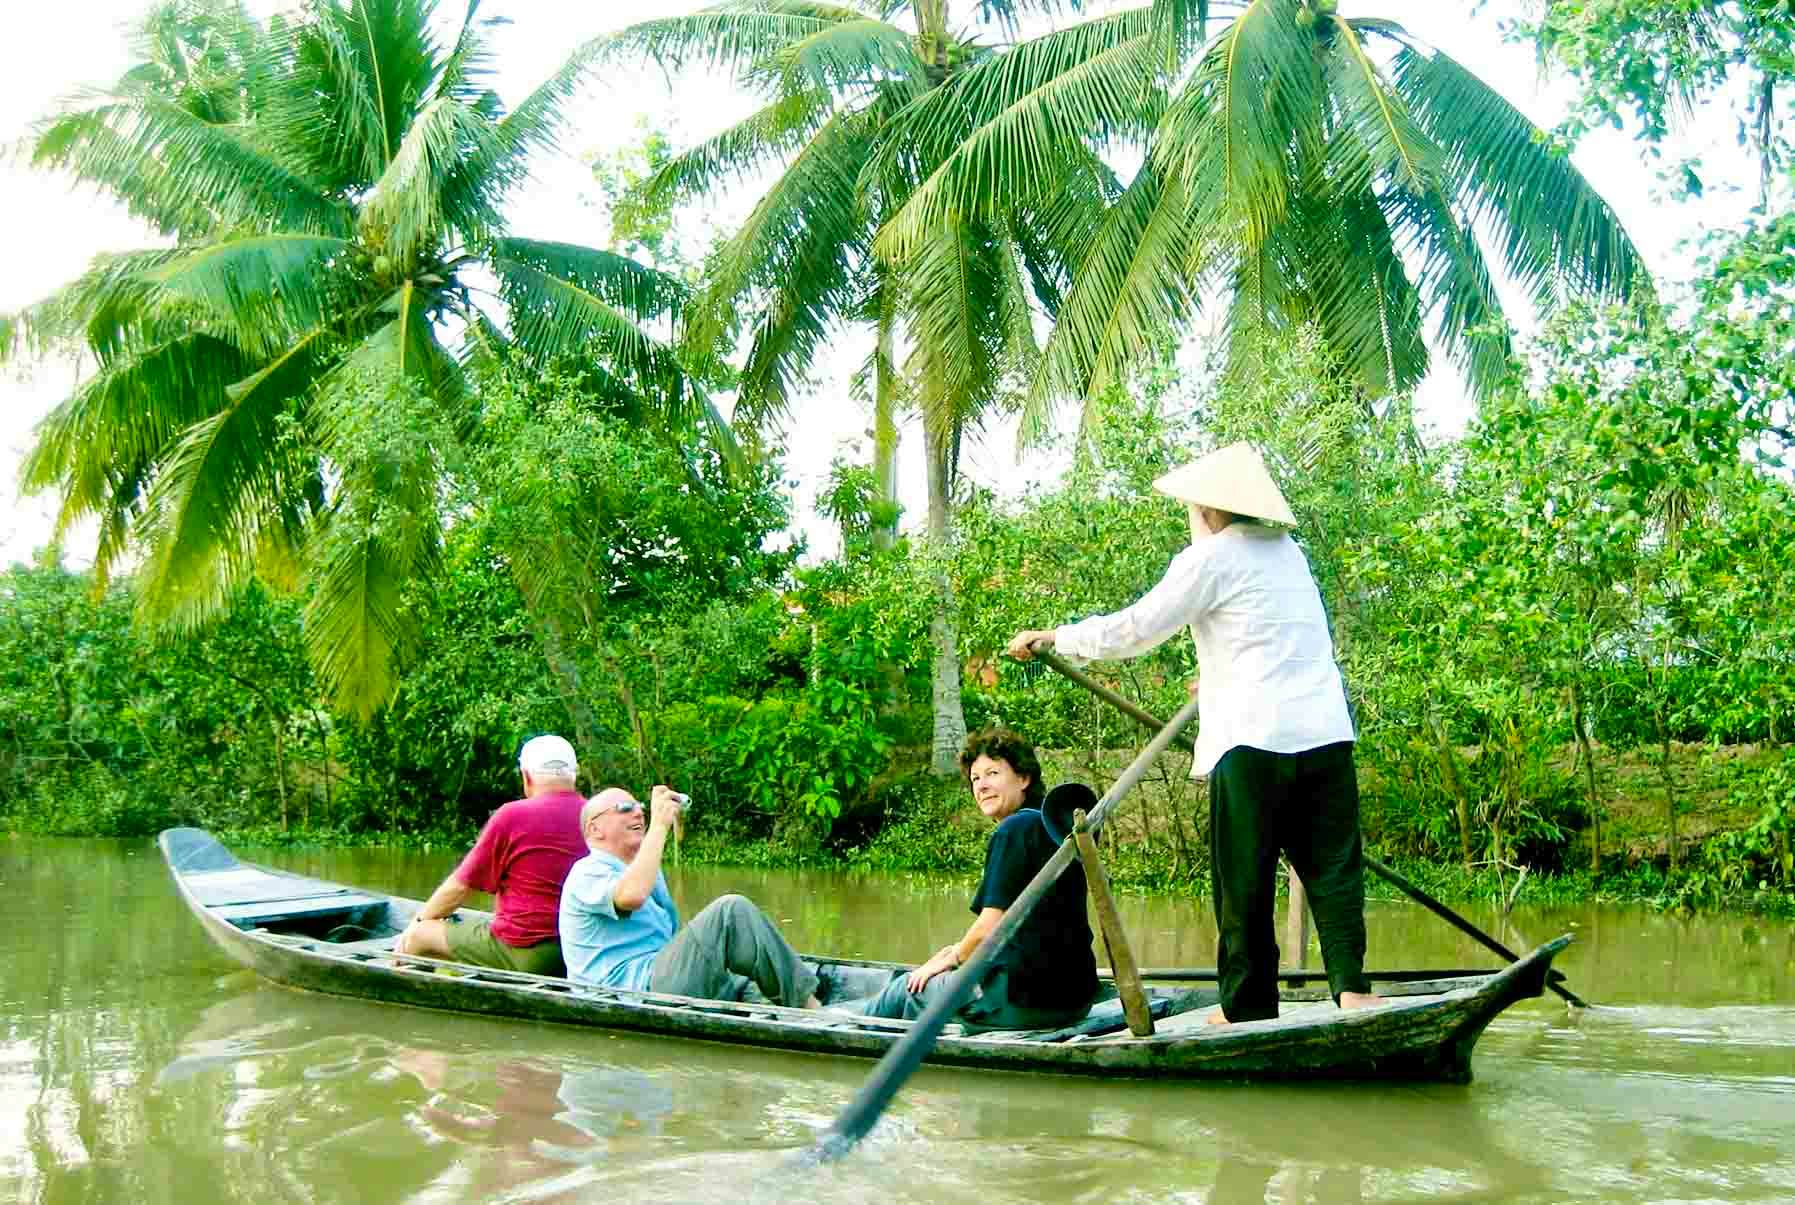 Cu Chi Tunnels and Mekong Delta Day Tour from Ho Chi Minh